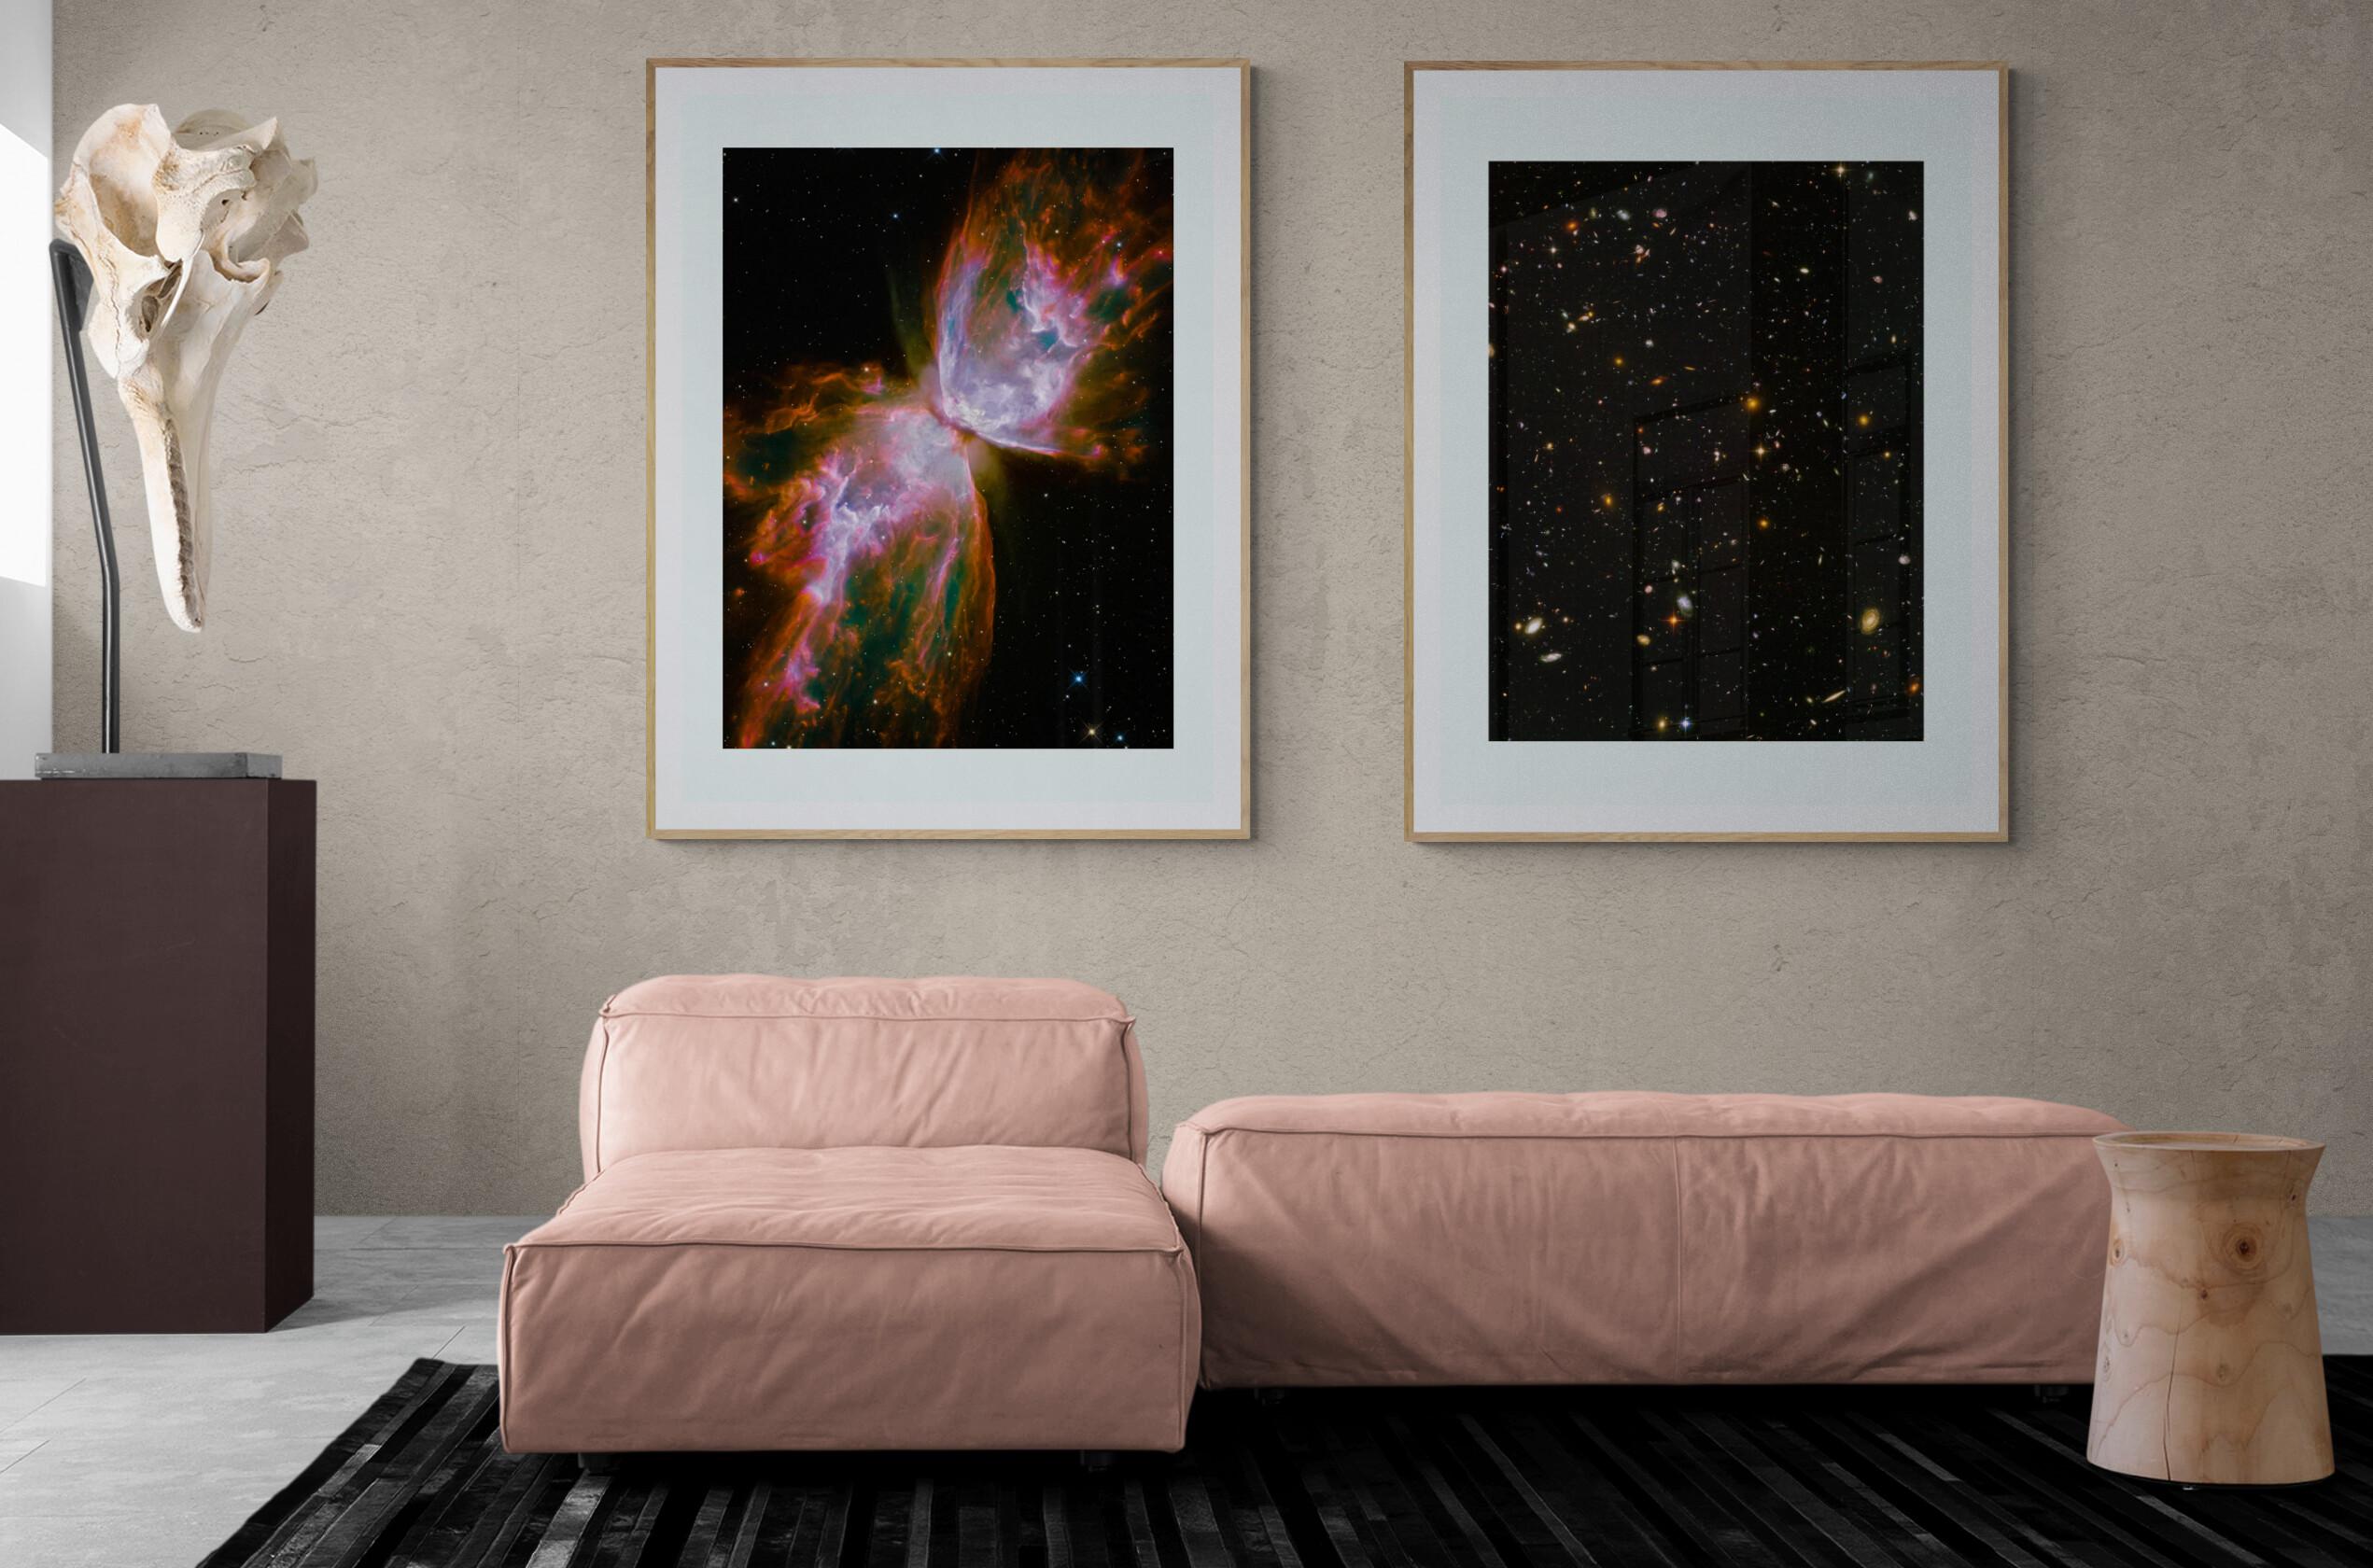 Original museum grade exhibition prints on acid-free archival photographic paper.

The bright clusters and nebulae of planet Earth's night sky are often named for flowers or insects. Though its wingspan covers over 3 light-years, NGC 6302 is no